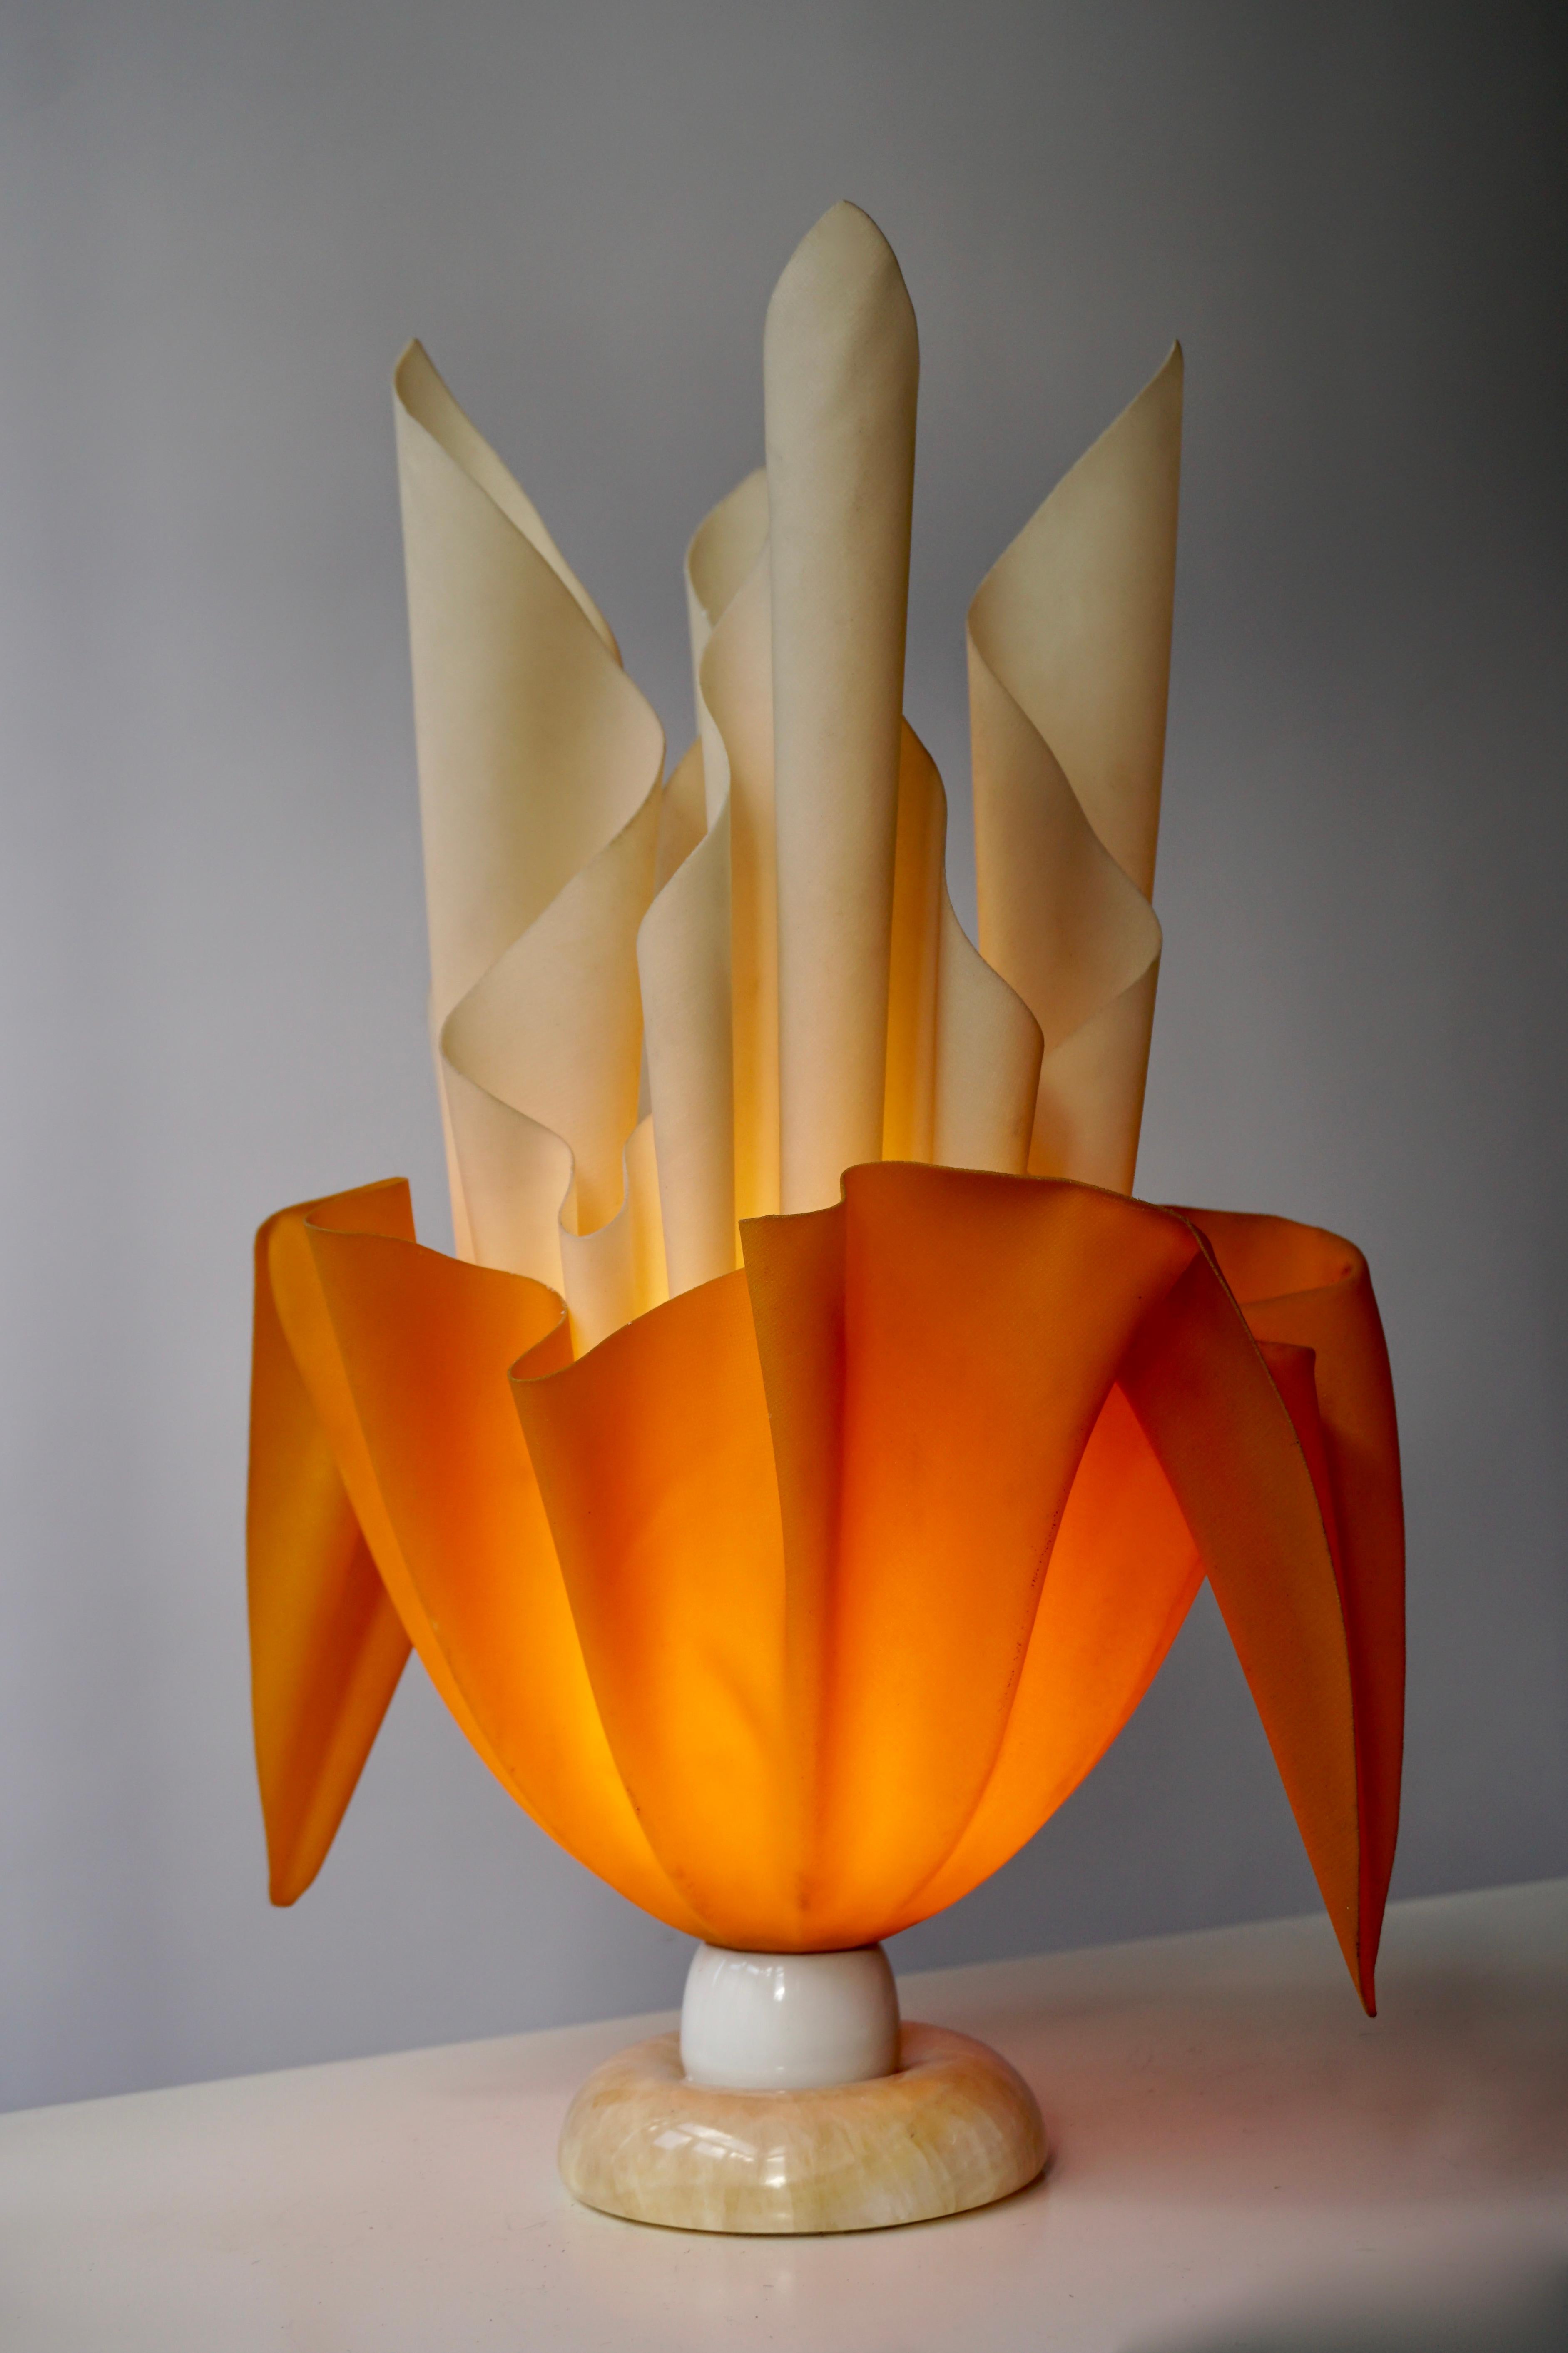 Materials: Round white marble base. Lampshade made of white and orange fabric soaked in some colourless resin or polyester. Dried in a handkerchief or flaming torch style. Plastic E27 socket.

Height: 51 cm / 9.05”
Width: ∅ 35 cm / 5.90”
Depth: 28